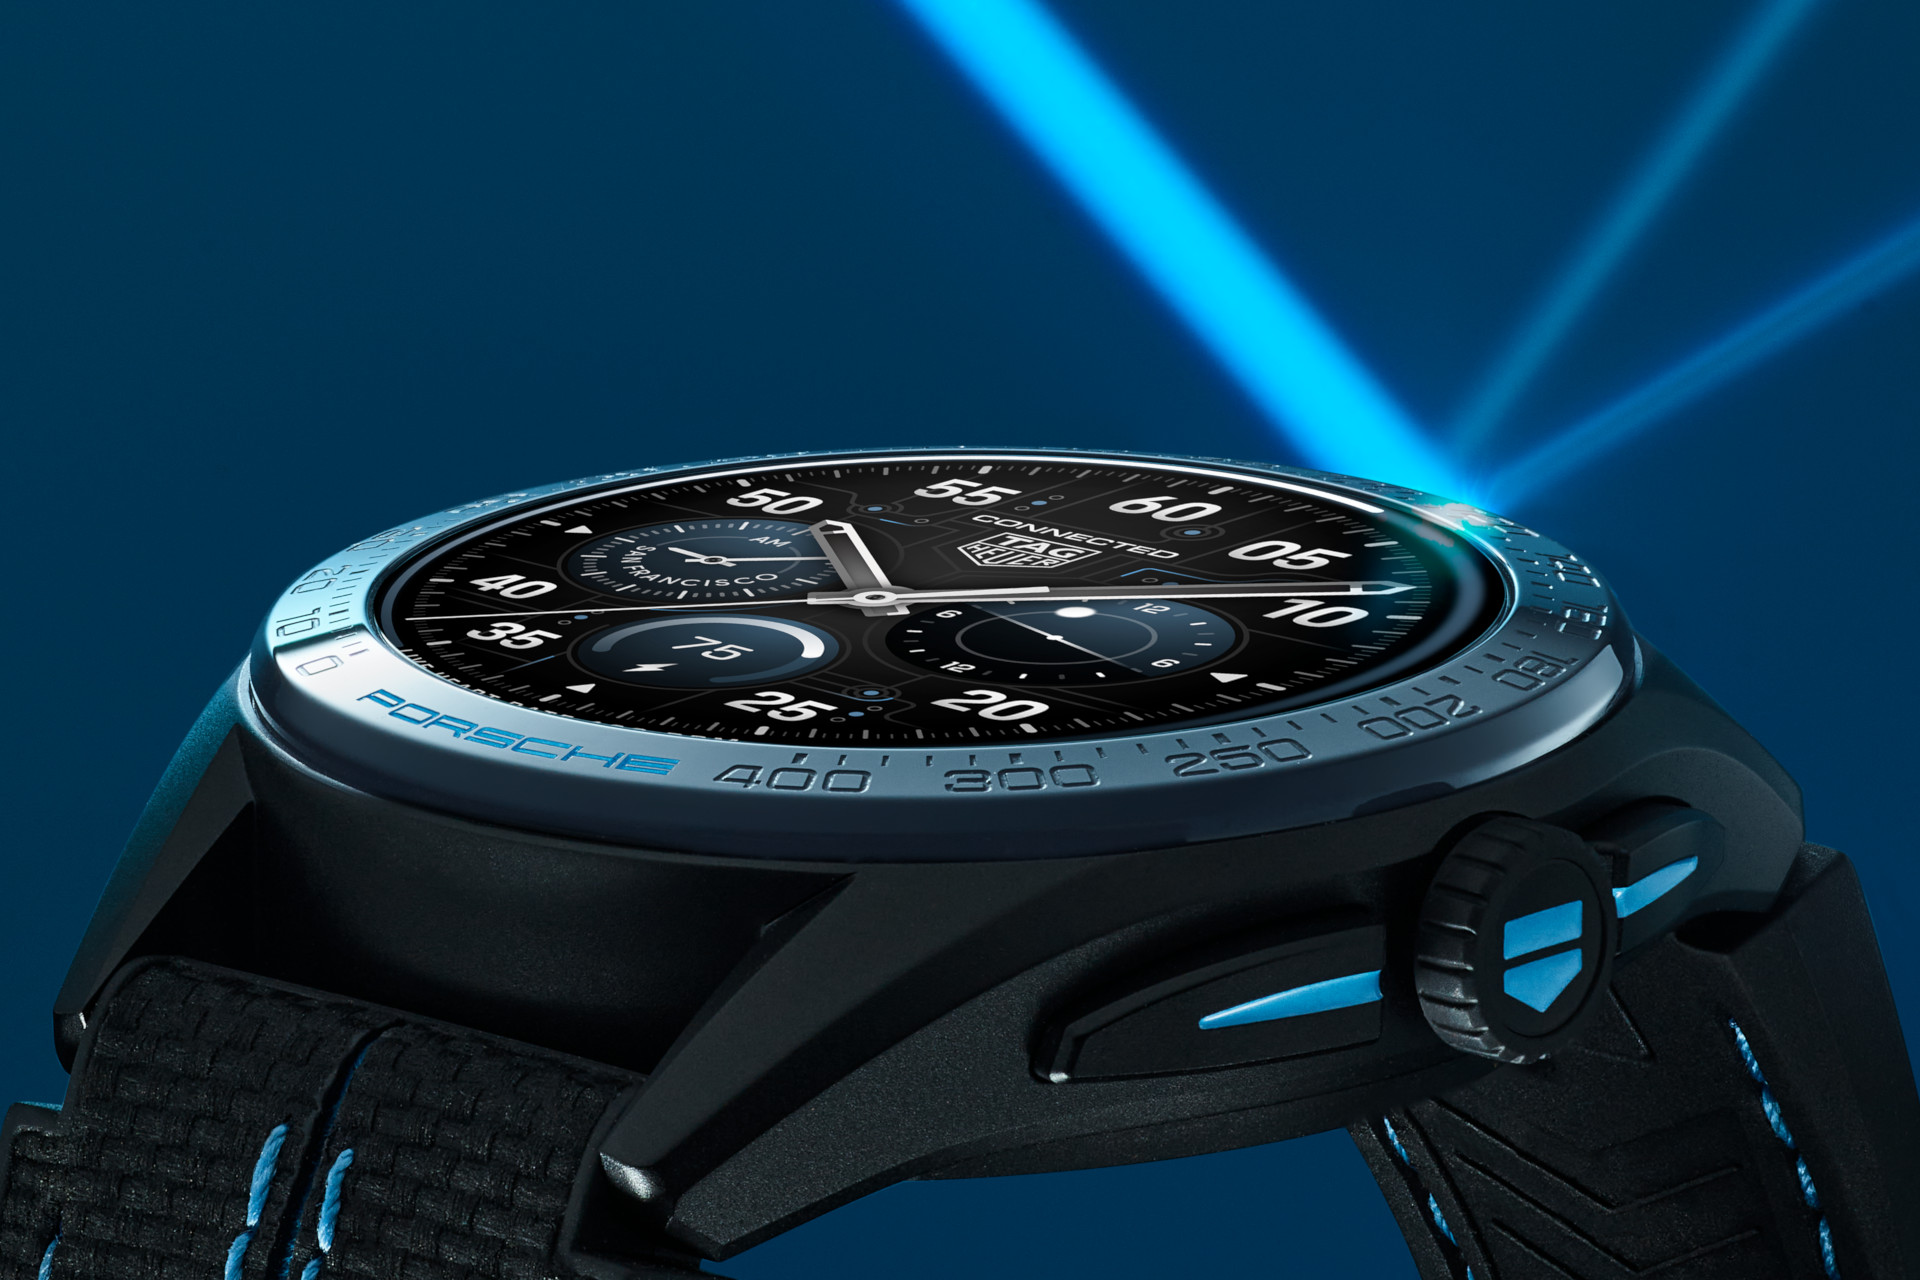 TAG Heuer Teams Up with Porsche for Special Edition Watch